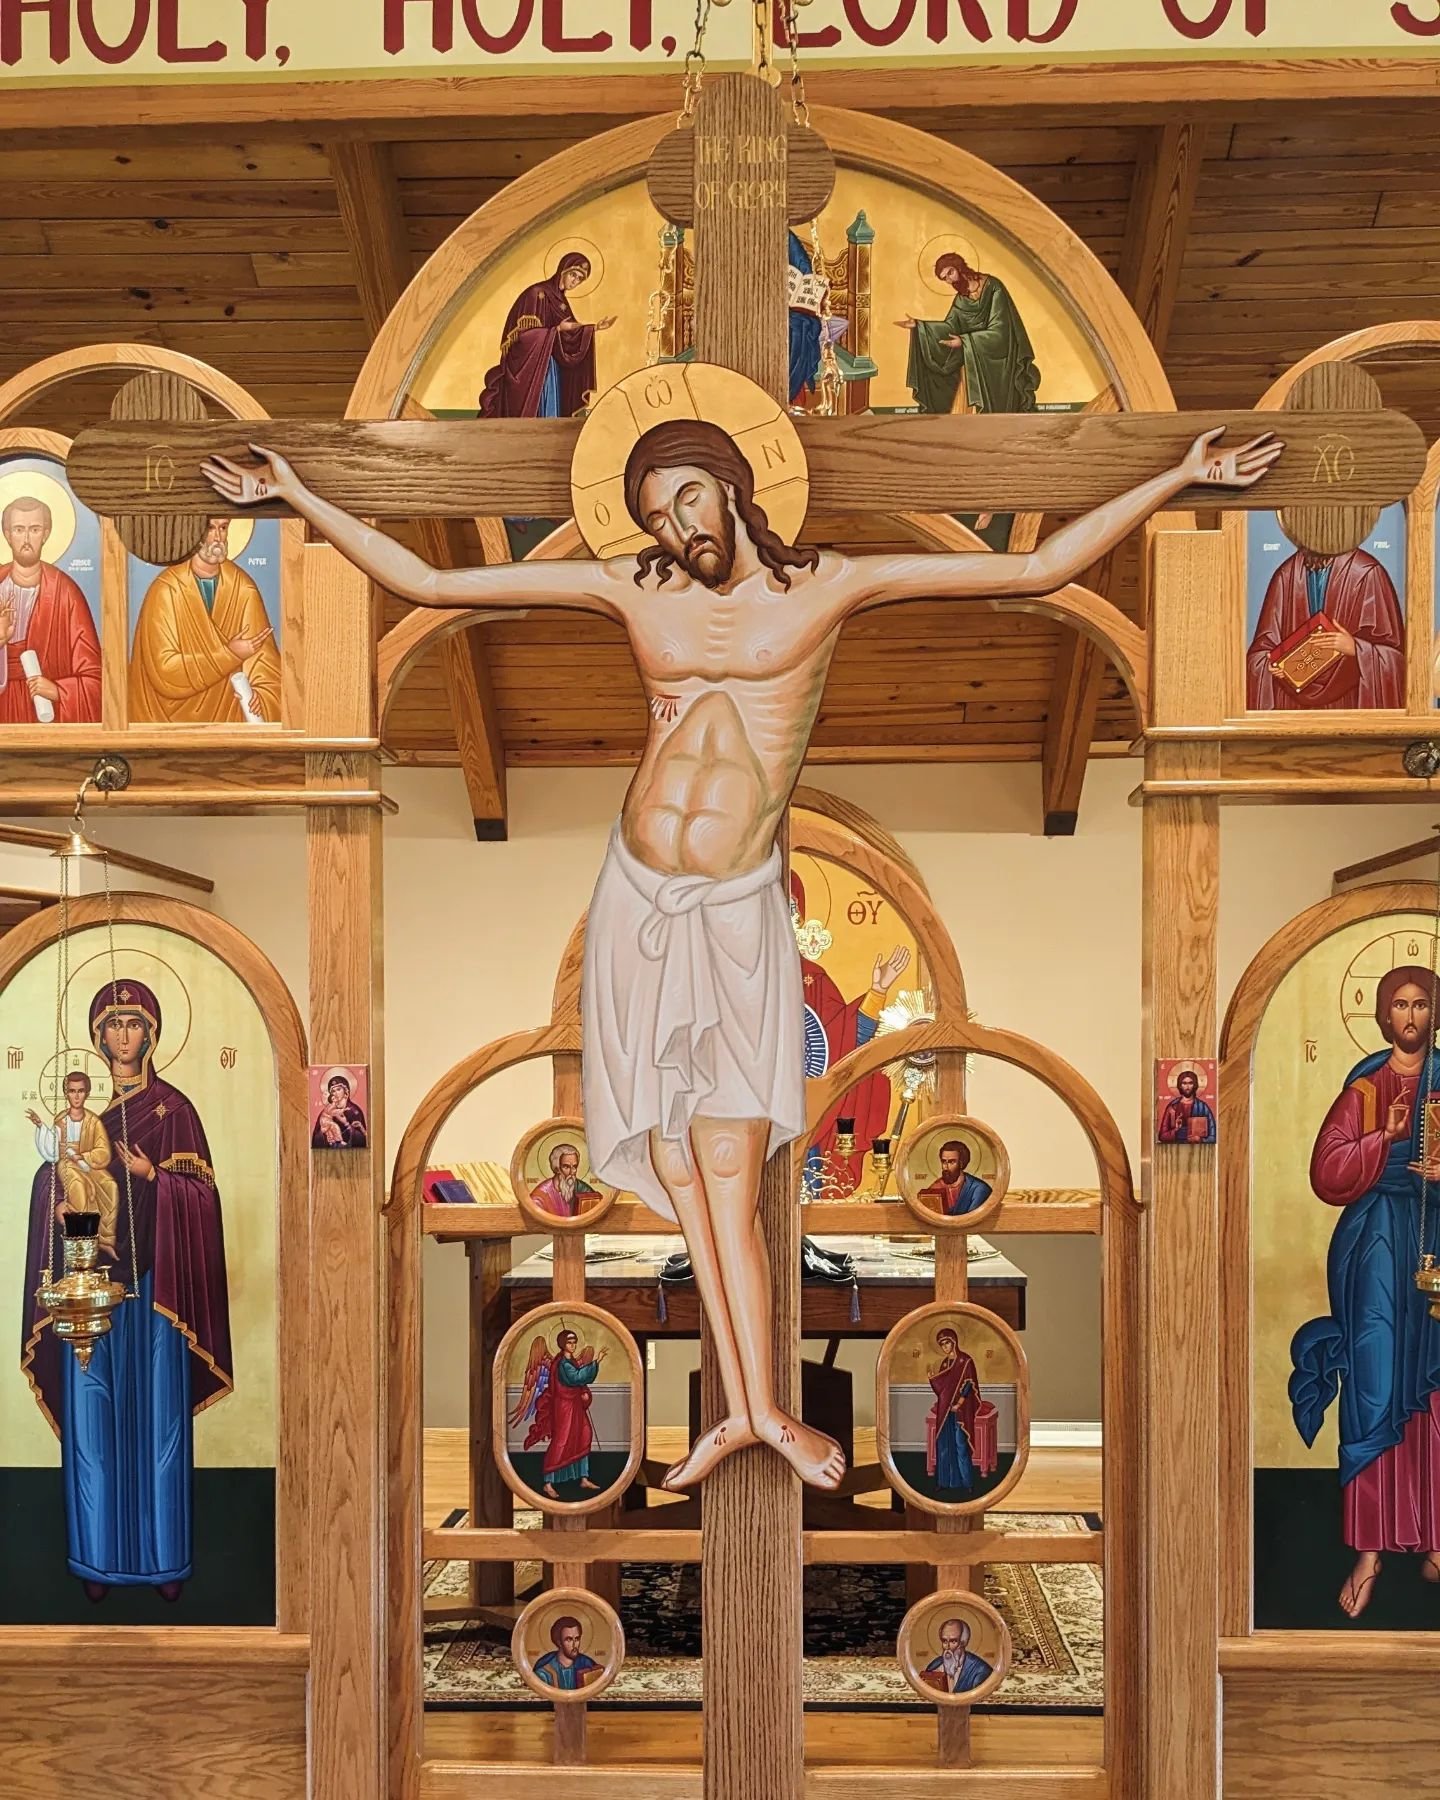 I collaborated on this wonderful project with @kenthecarpenter for Saint Innocent Orthodox Church, Olmsted Falls, Ohio. I painted the Lord's Corpus with egg tempera and gold, and Ken the Carpenter made the oak cross. Would your parish like a new cros